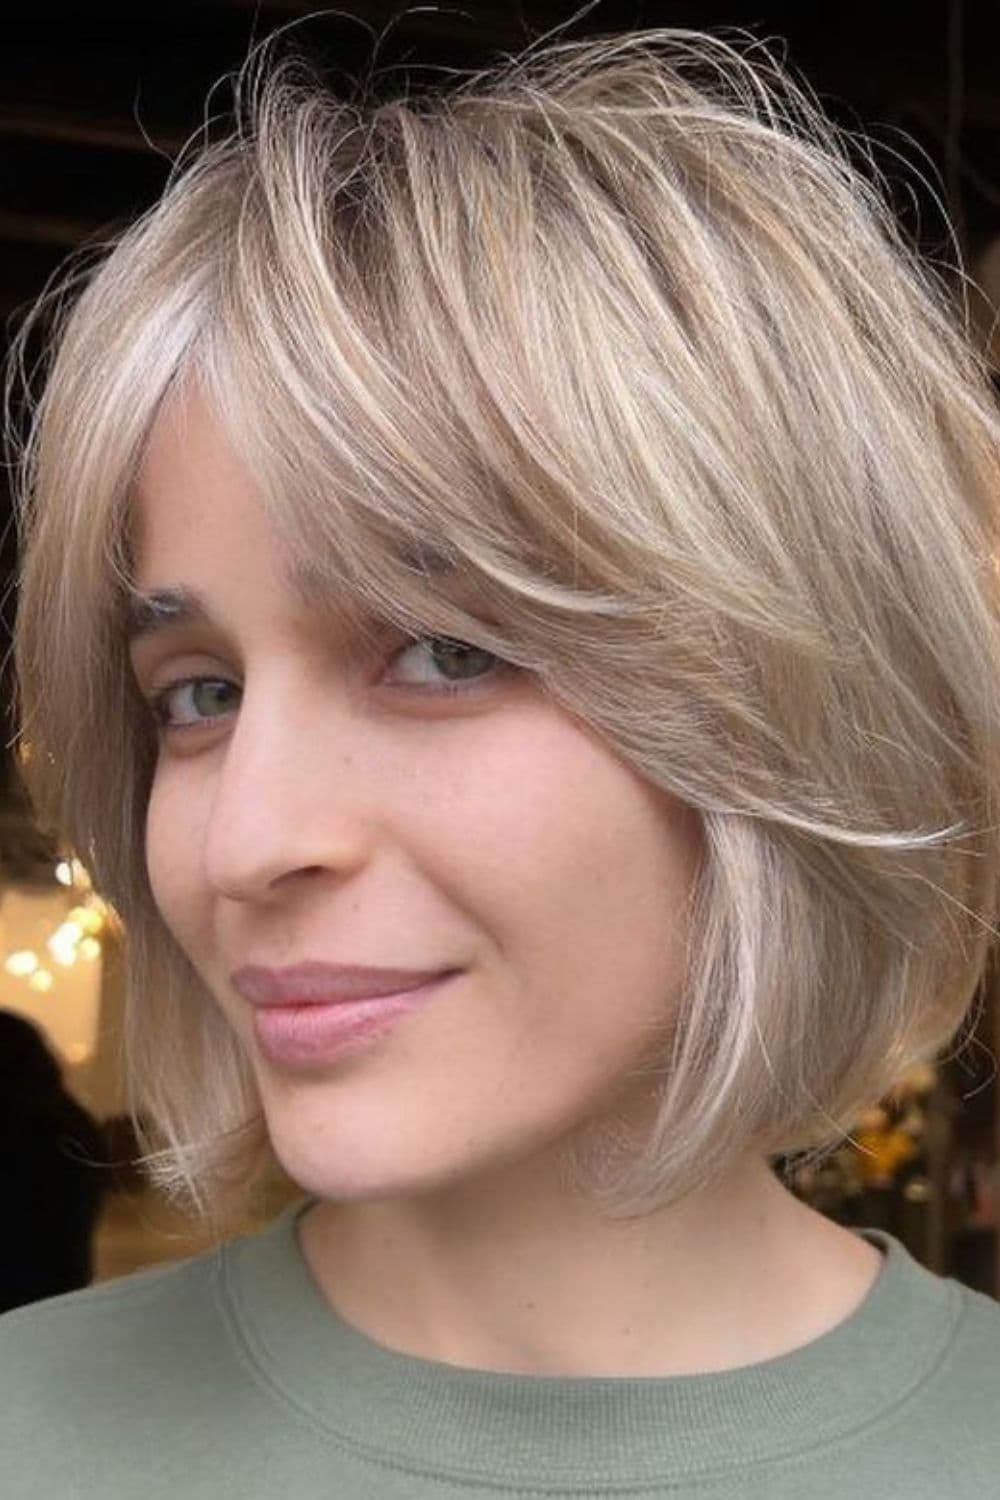 A woman with blonde, short feathered hairstyle.